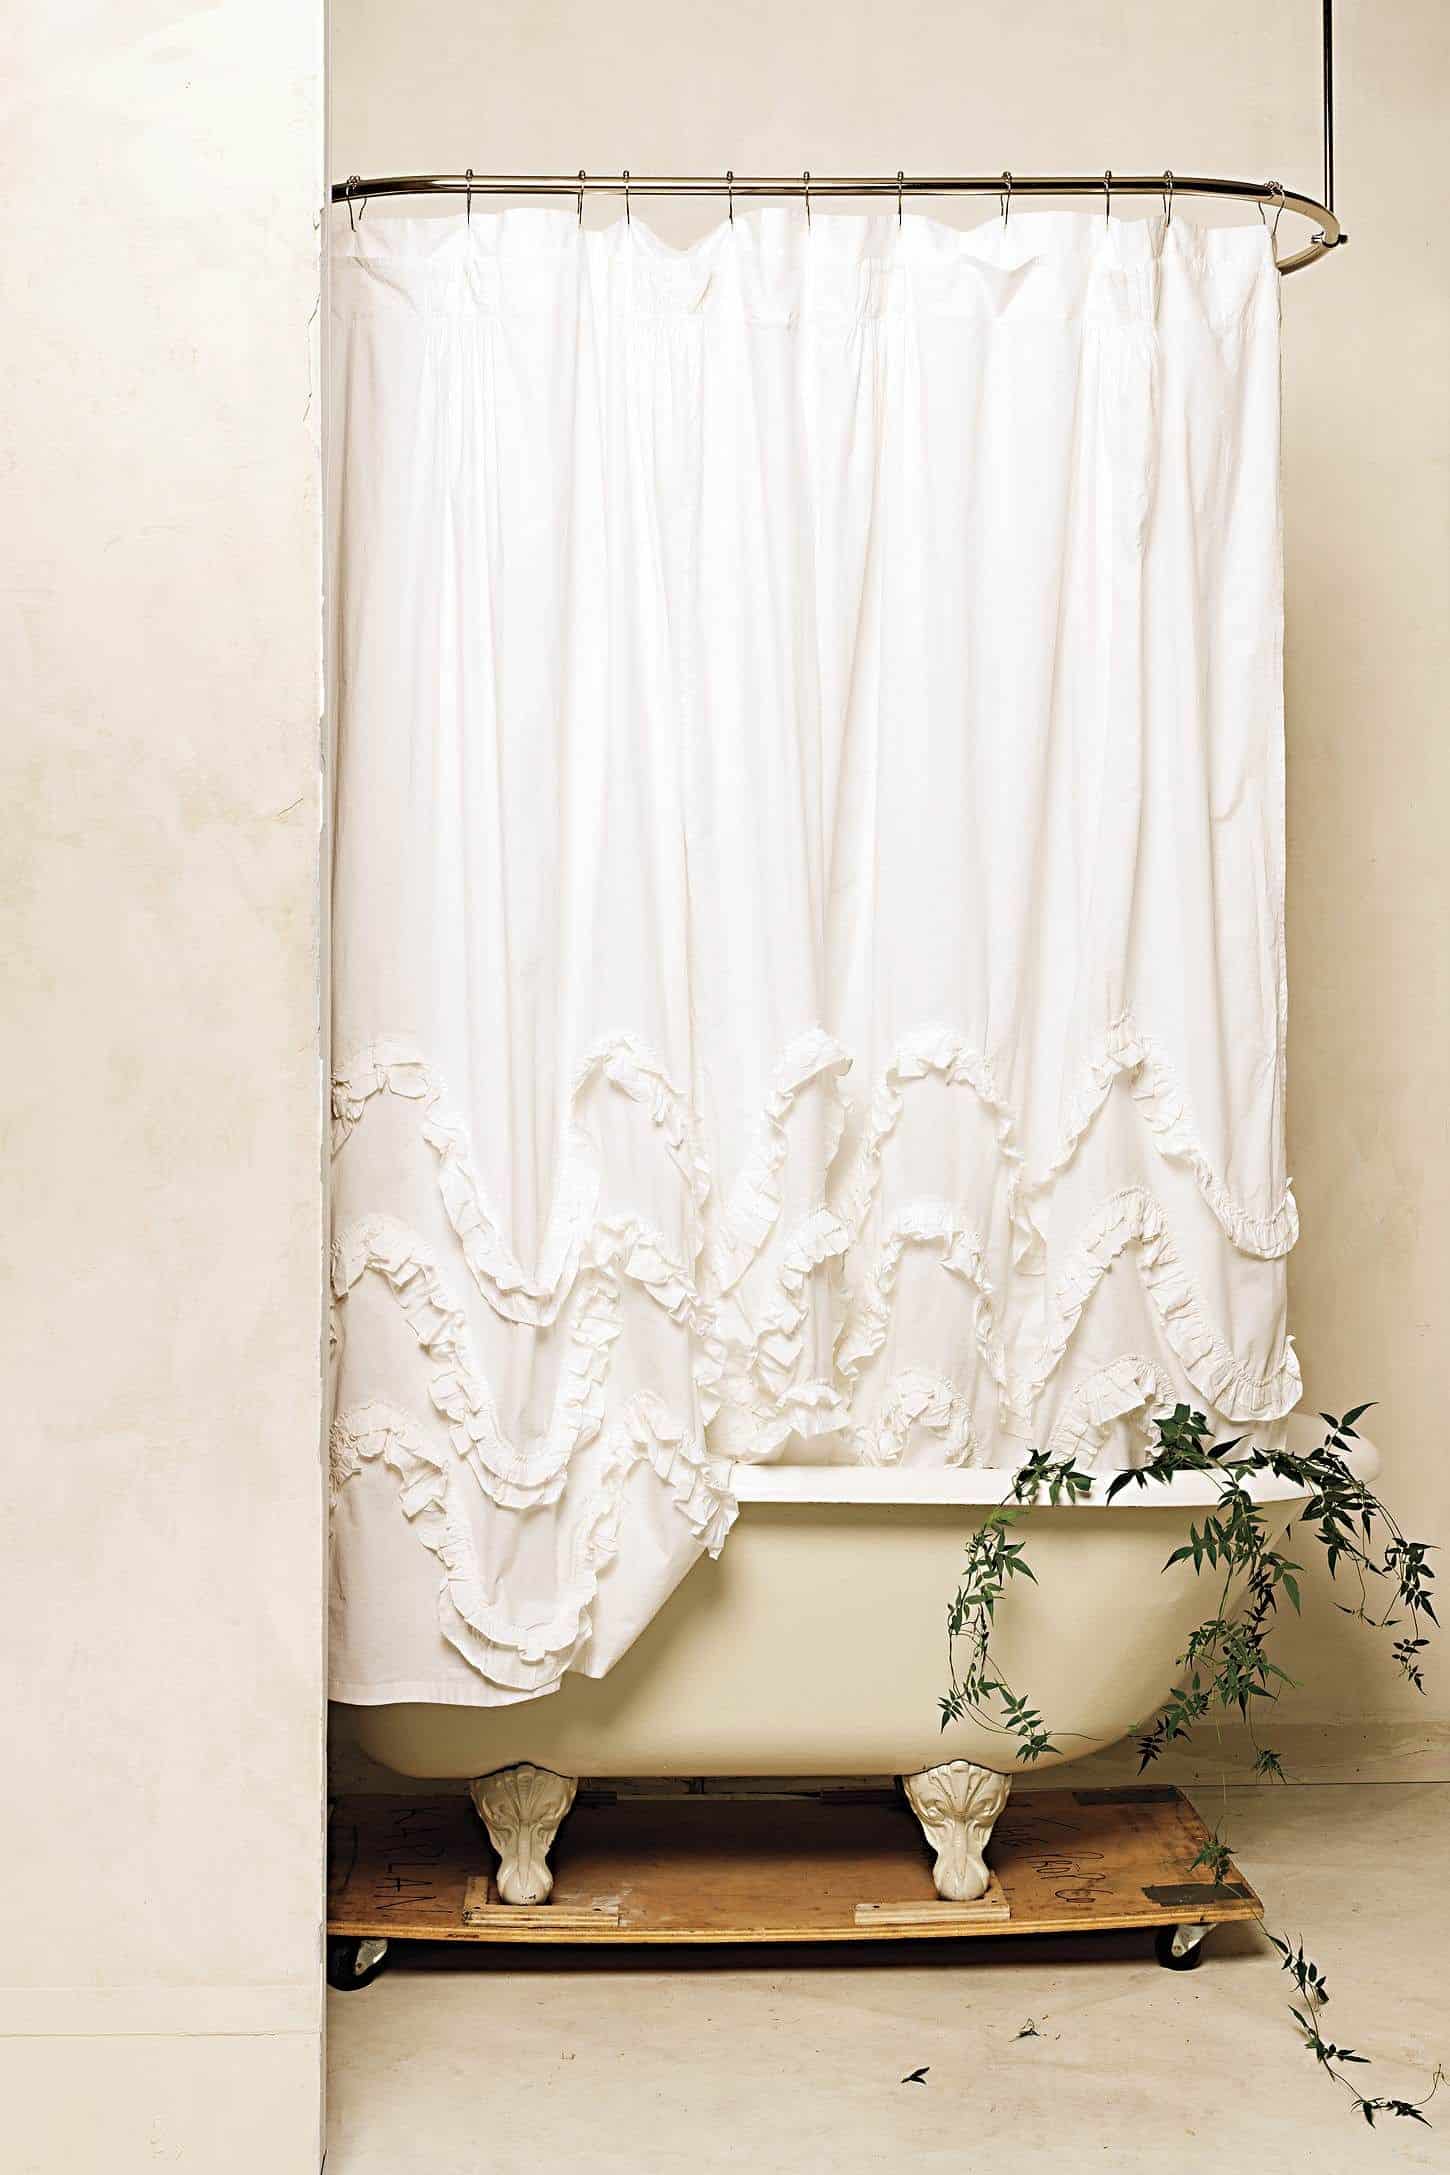 And Easy Diy Shower Curtain Ideas, Shower Curtains That Split In The Middle